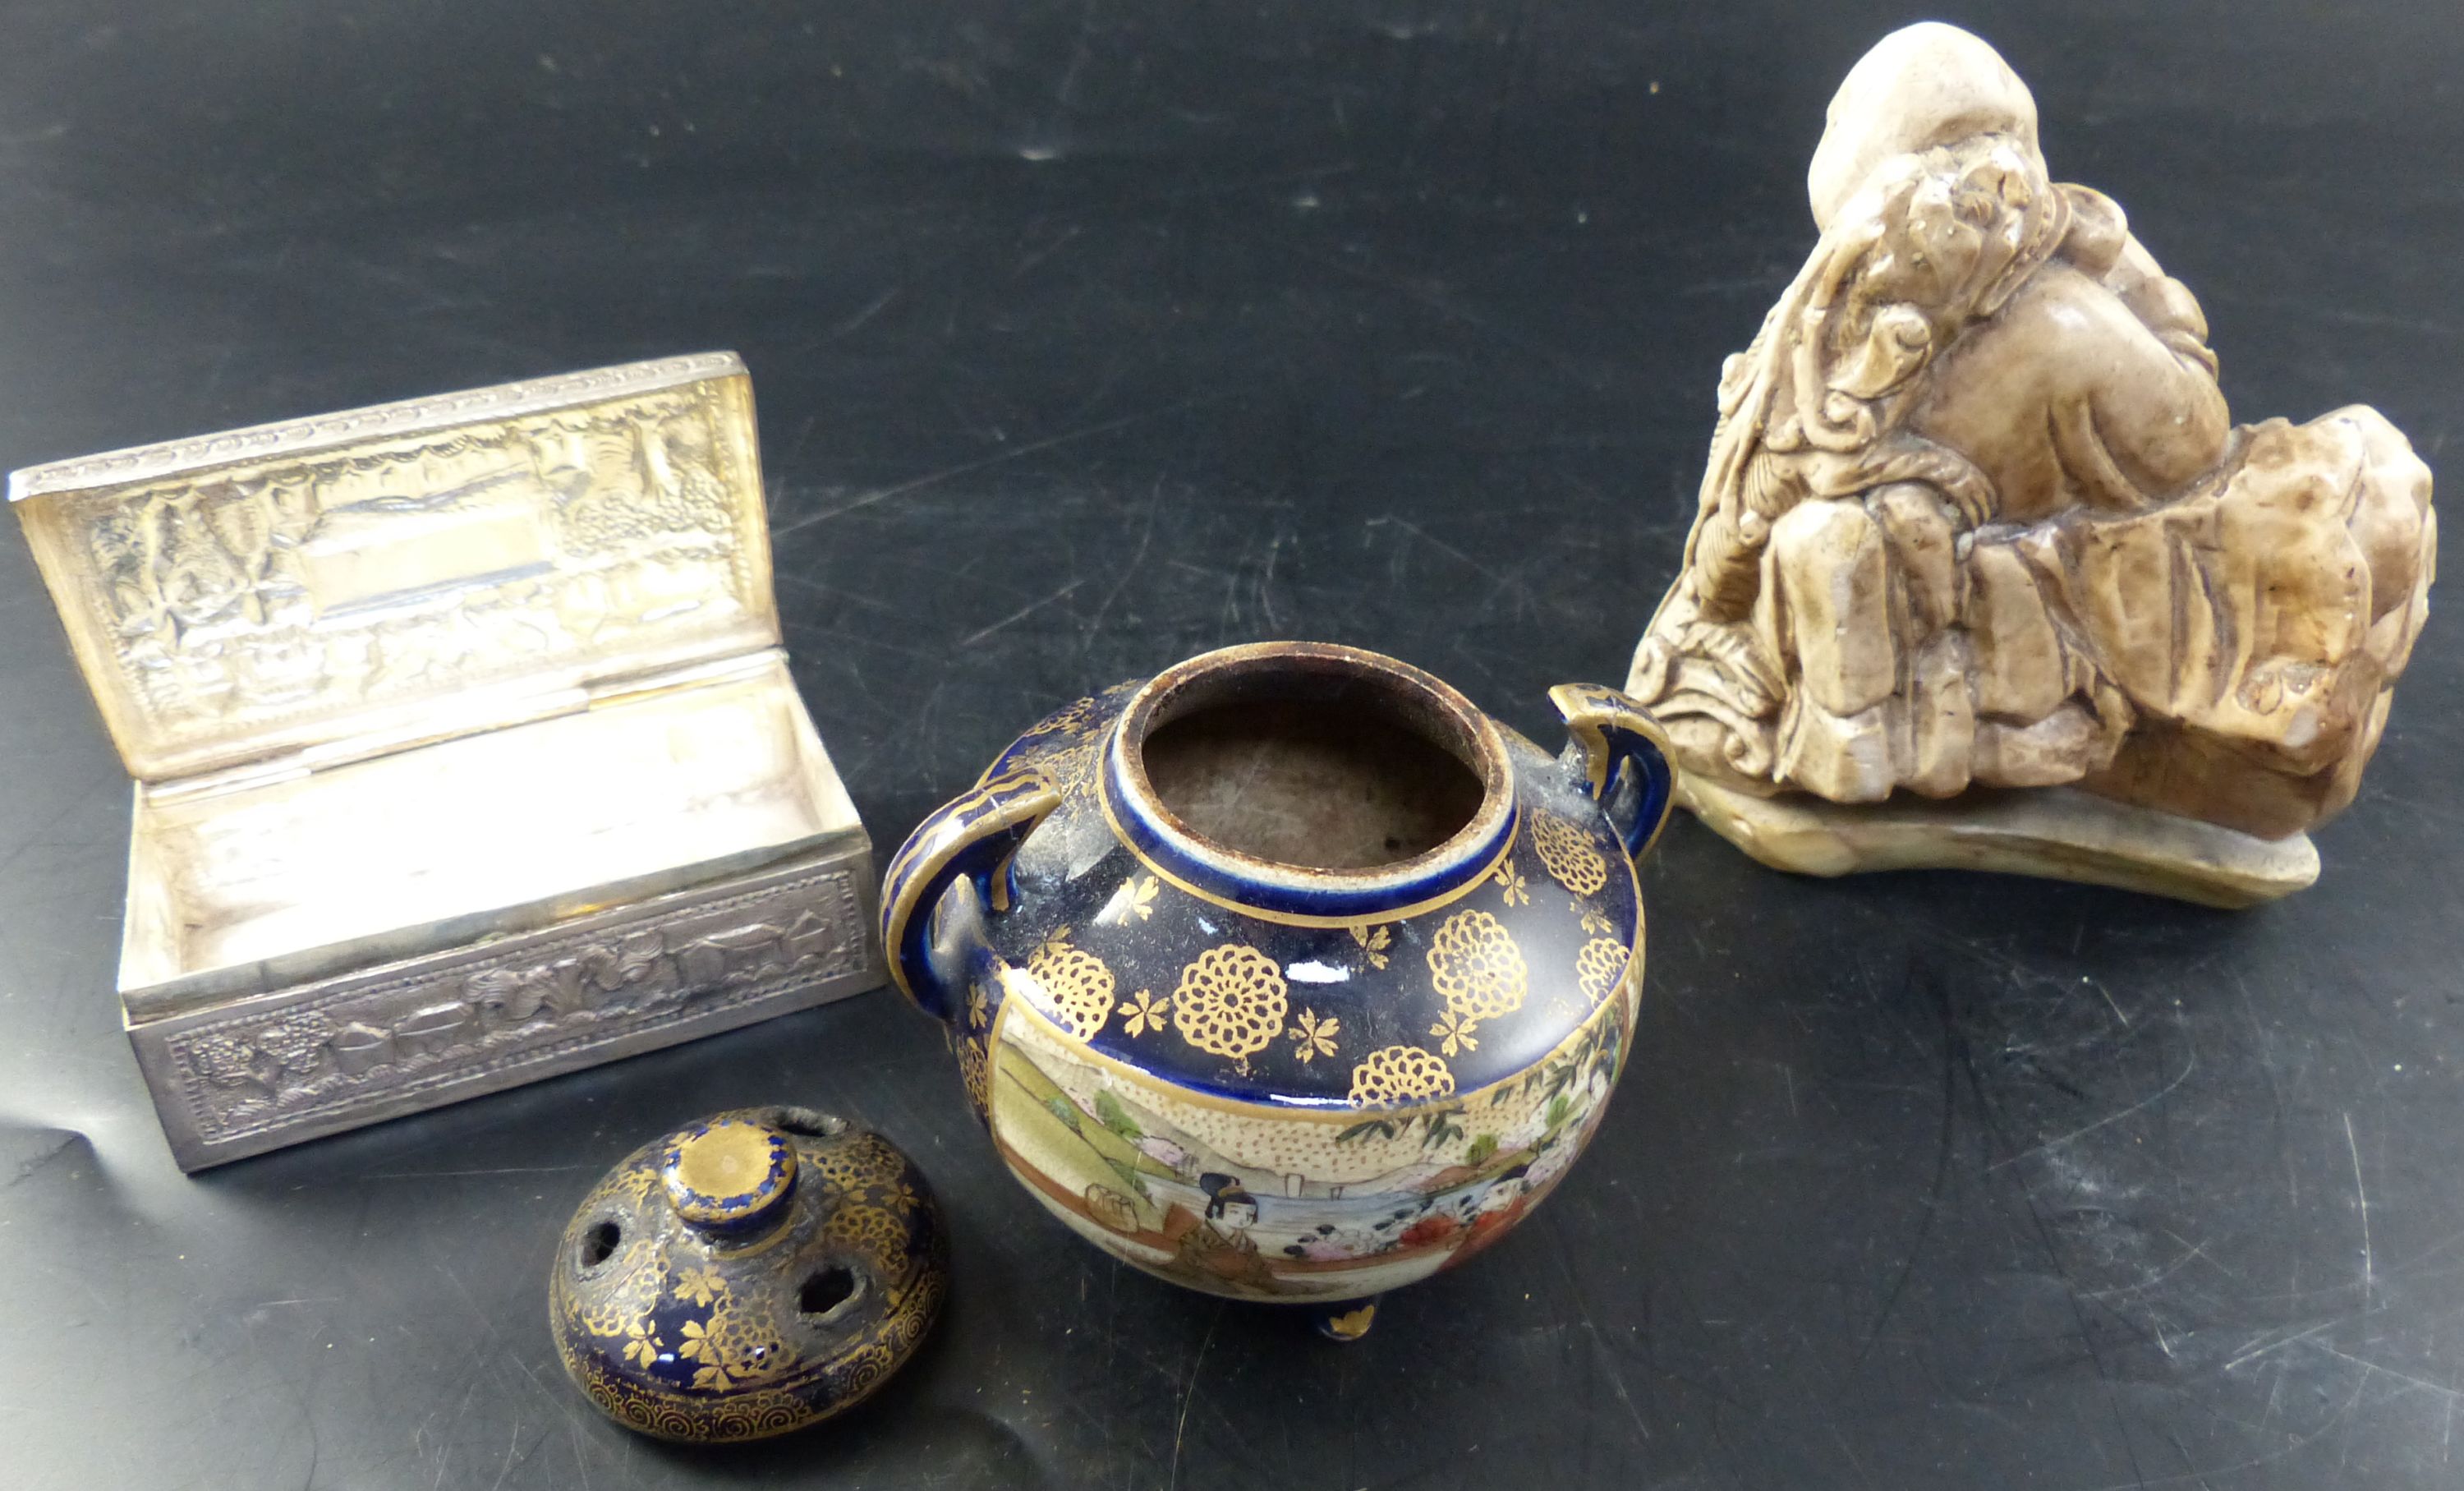 An early 20th century Indian white metal casket, a Satsuma koro, and a Chinese soap